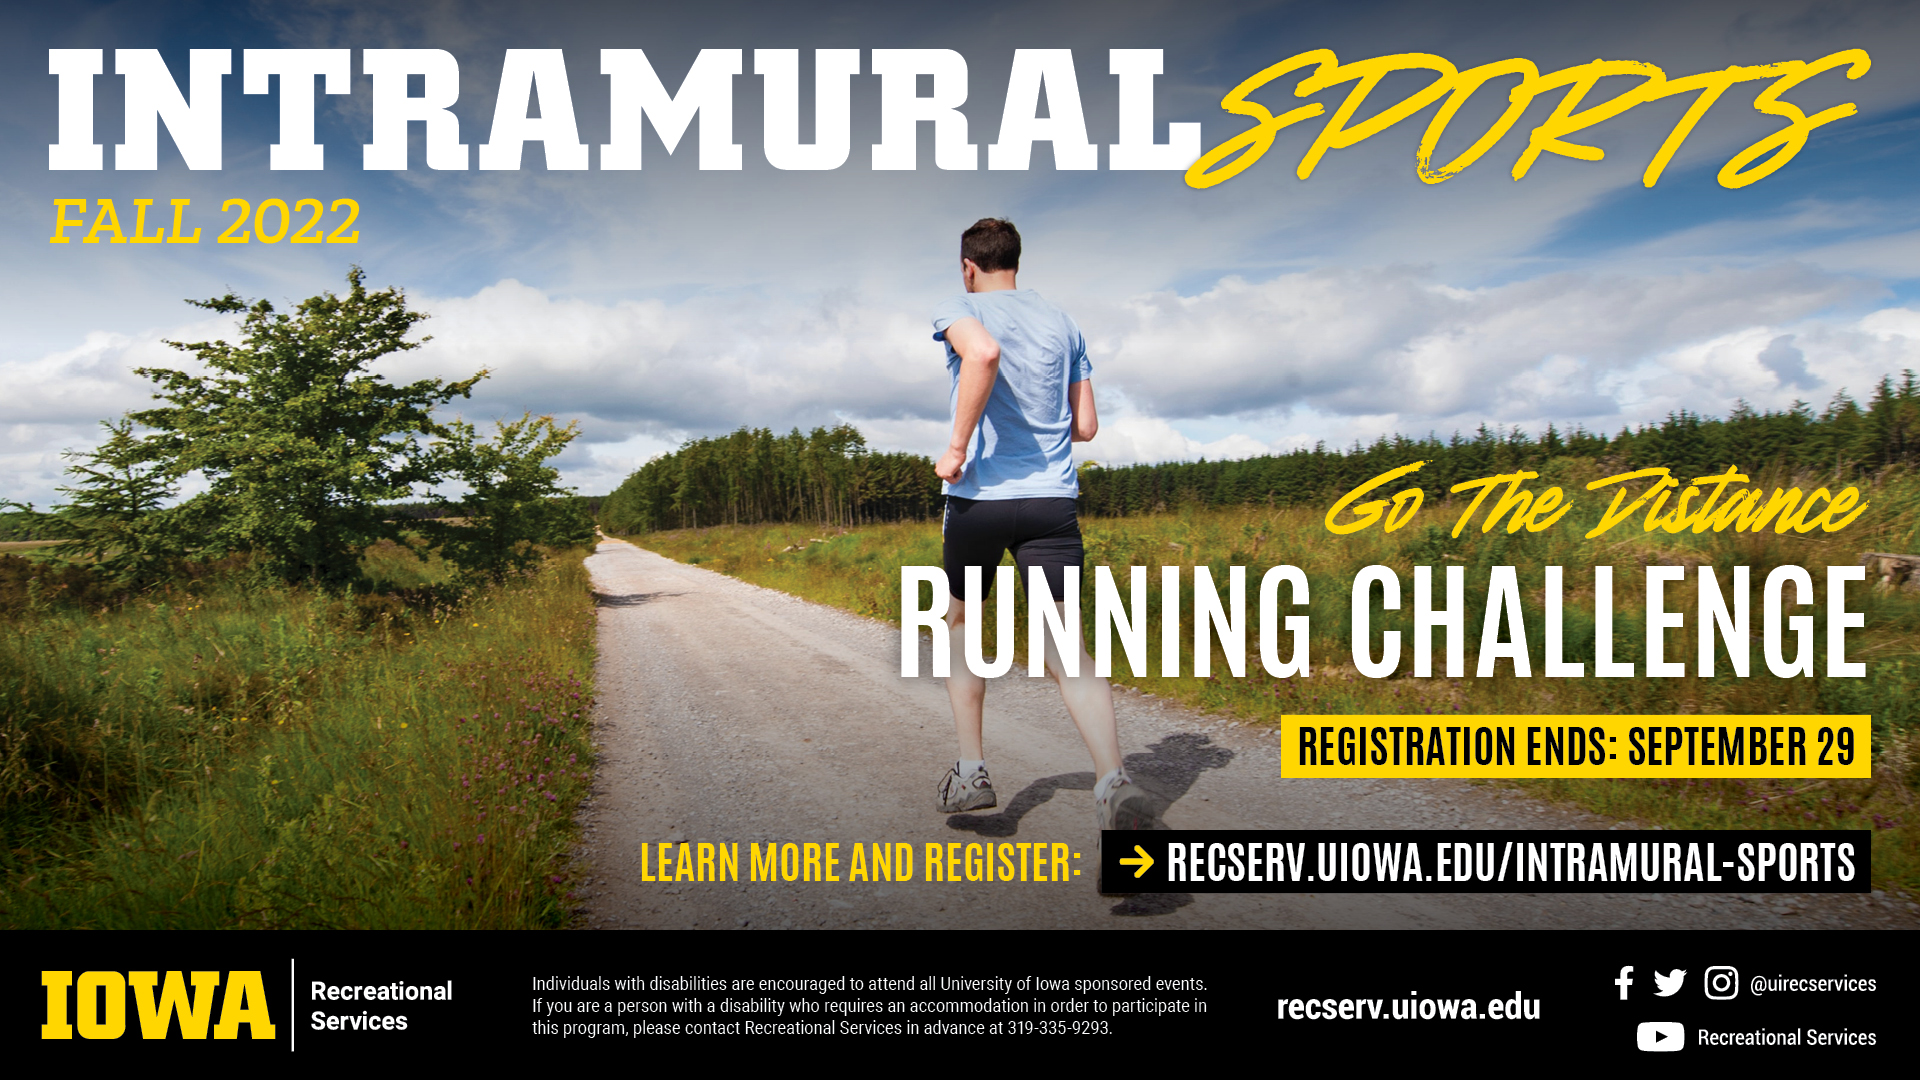 Intramural Sports Fall 2022: Go the Distance Running Challenge. Learn more and register at reserv.uiowa.edu/intramural-sports